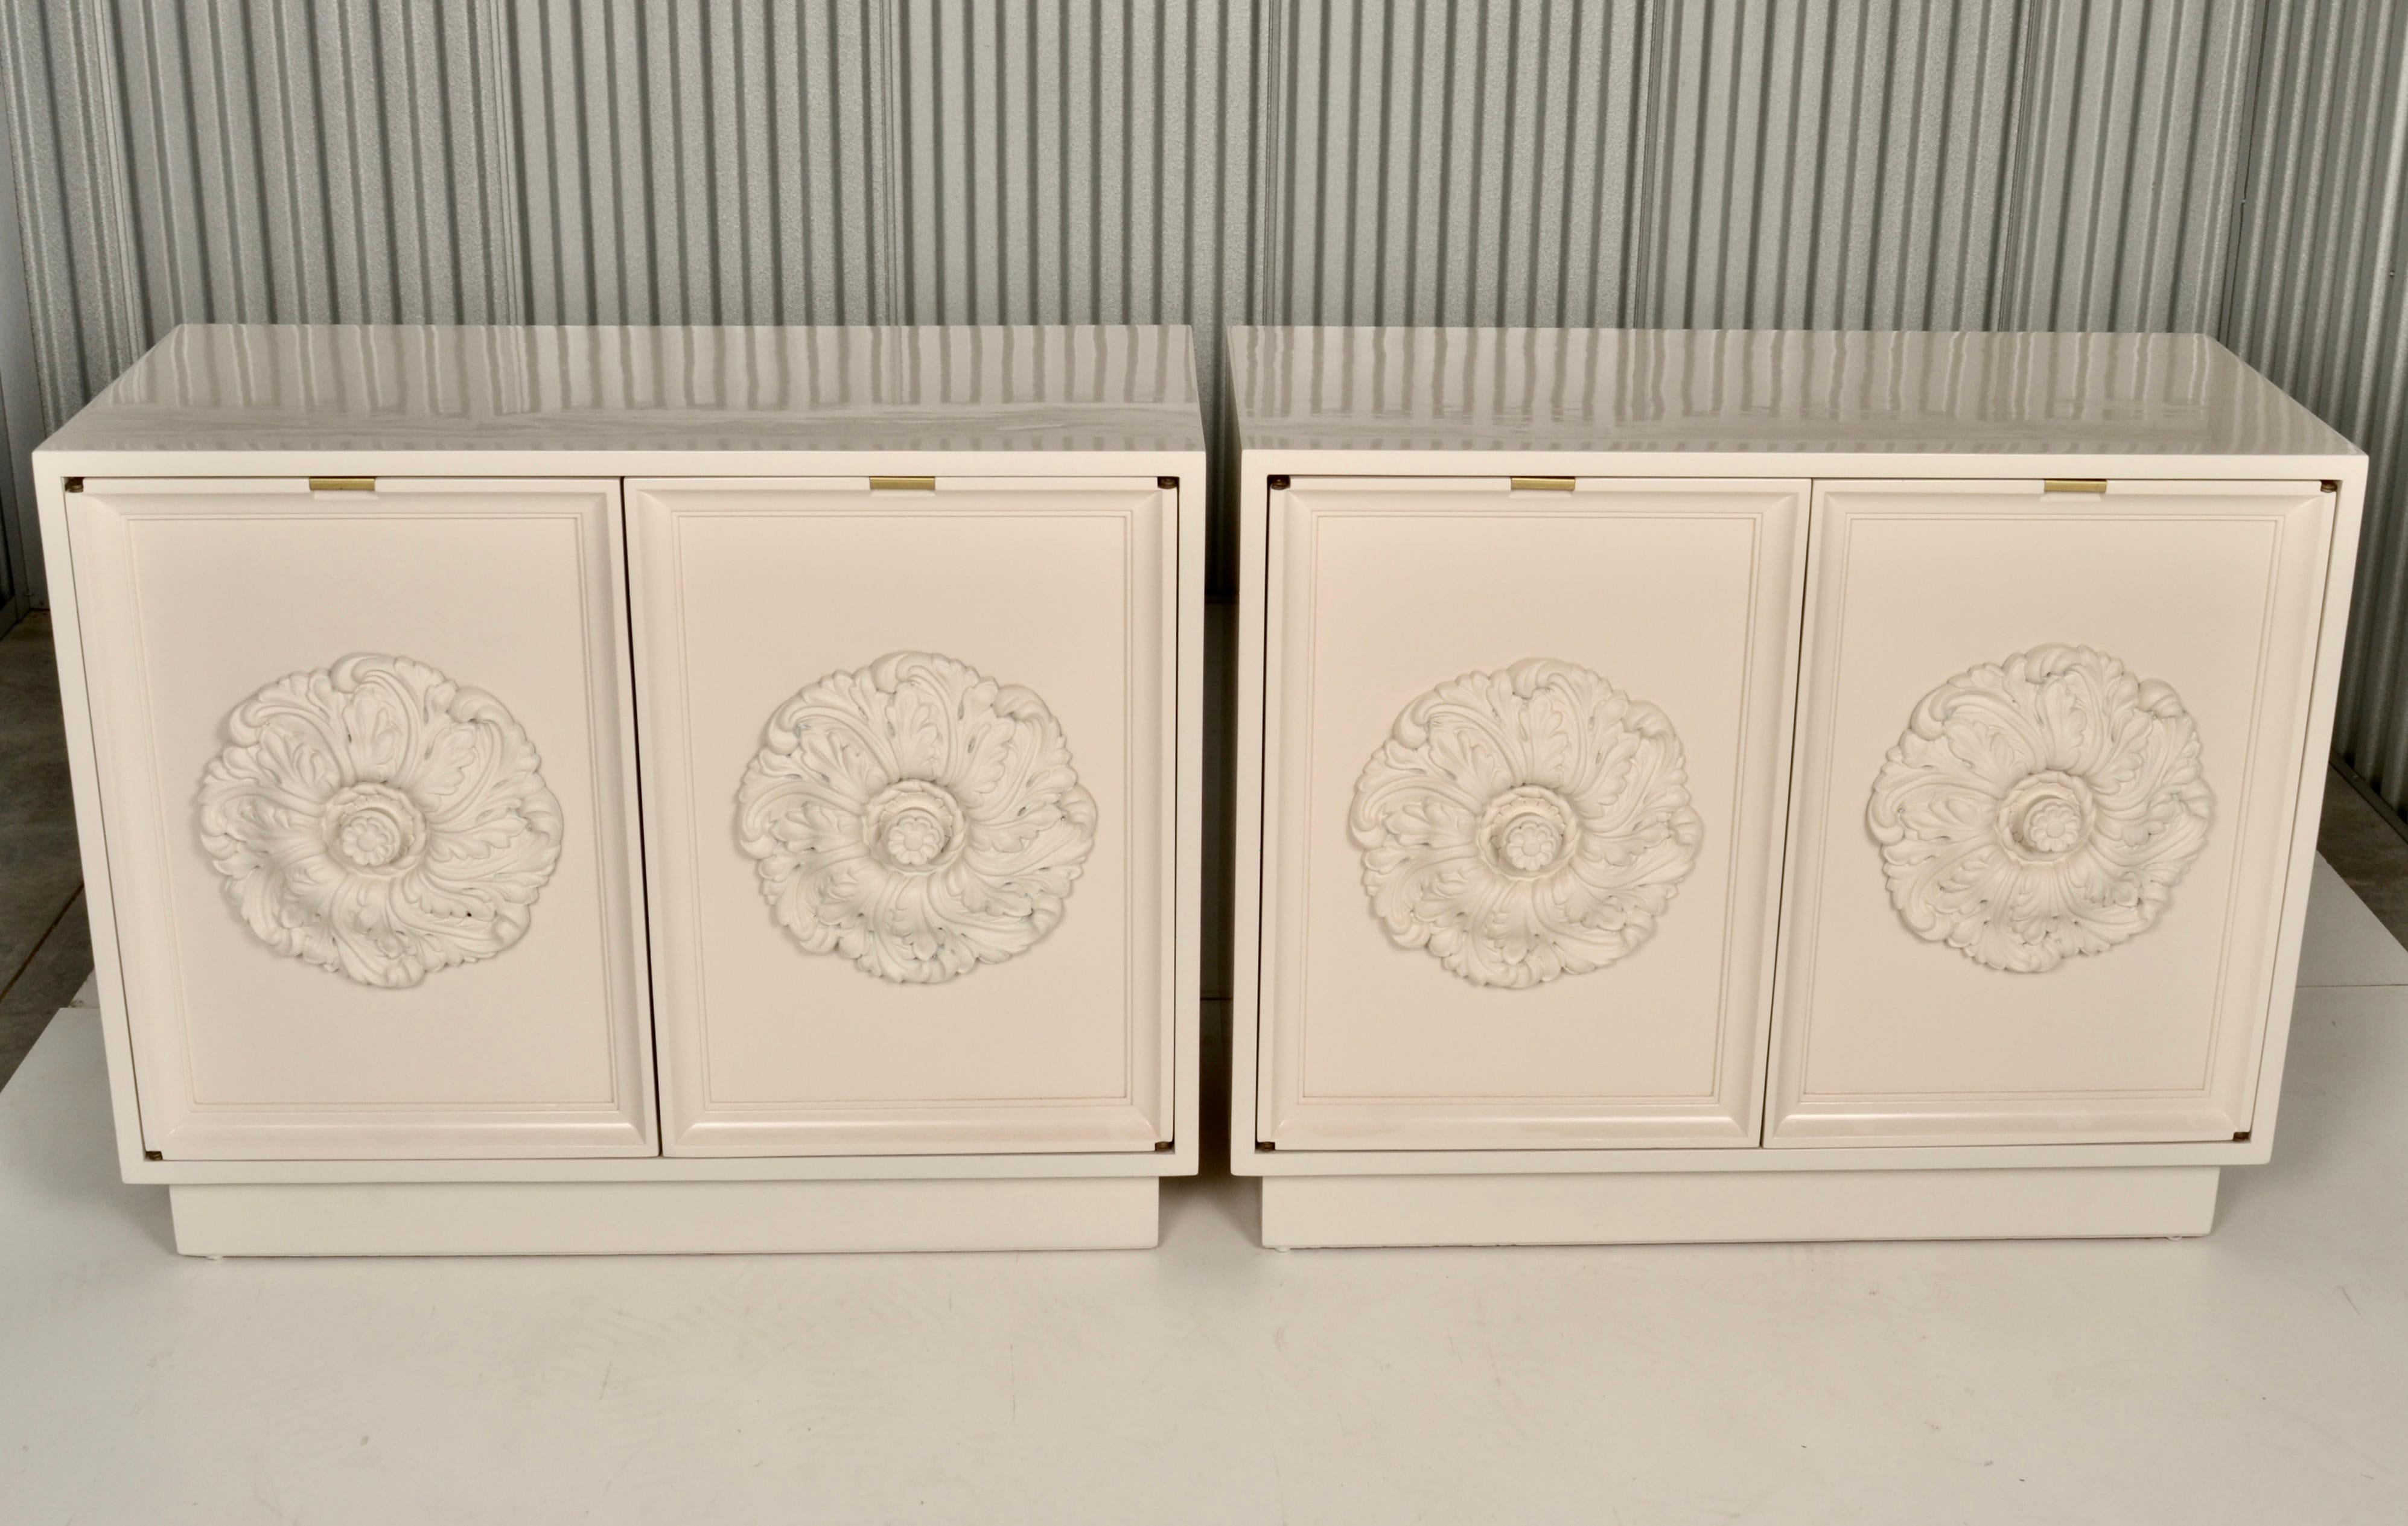 Glamorous cabinets from Lane Furniture, made in the 1960s and newly refreshed with White Dove lacquer. The body of the cabinets are a satin finish, and the applied medallions are a matte finish. They are in excellent condition.